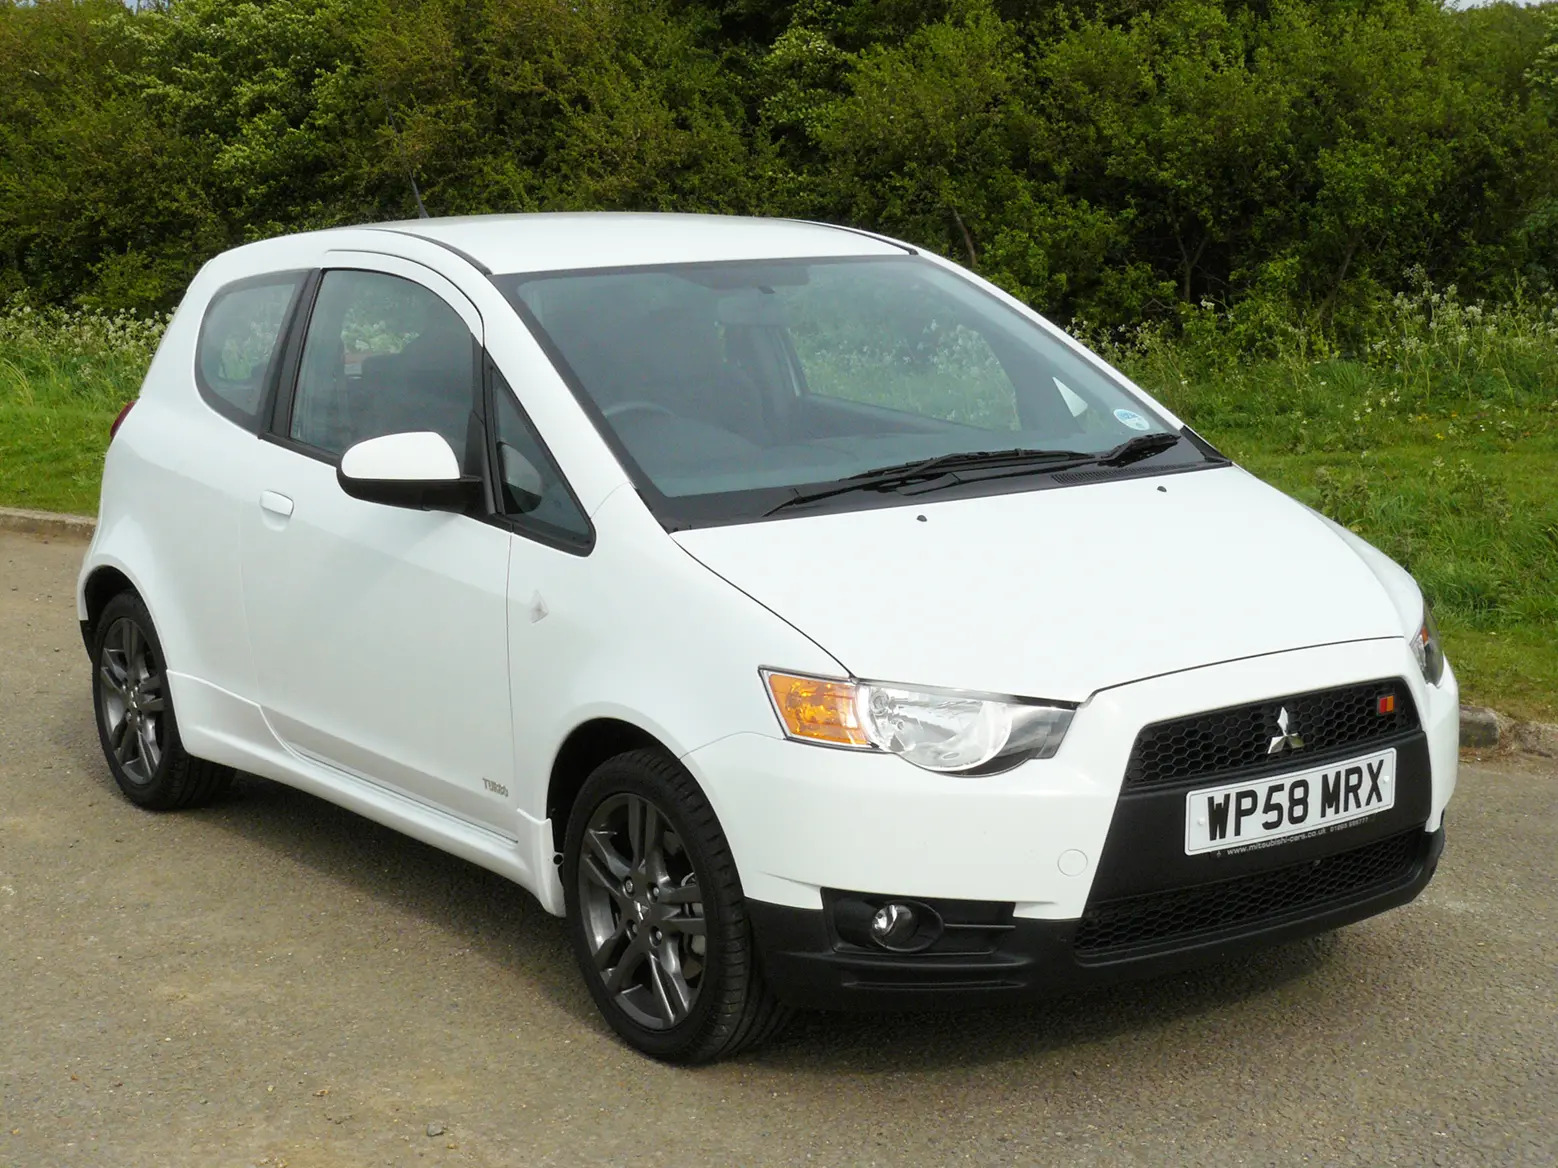 Mitsubishi Colt Review For Sale Specs Models  News in Australia   CarsGuide